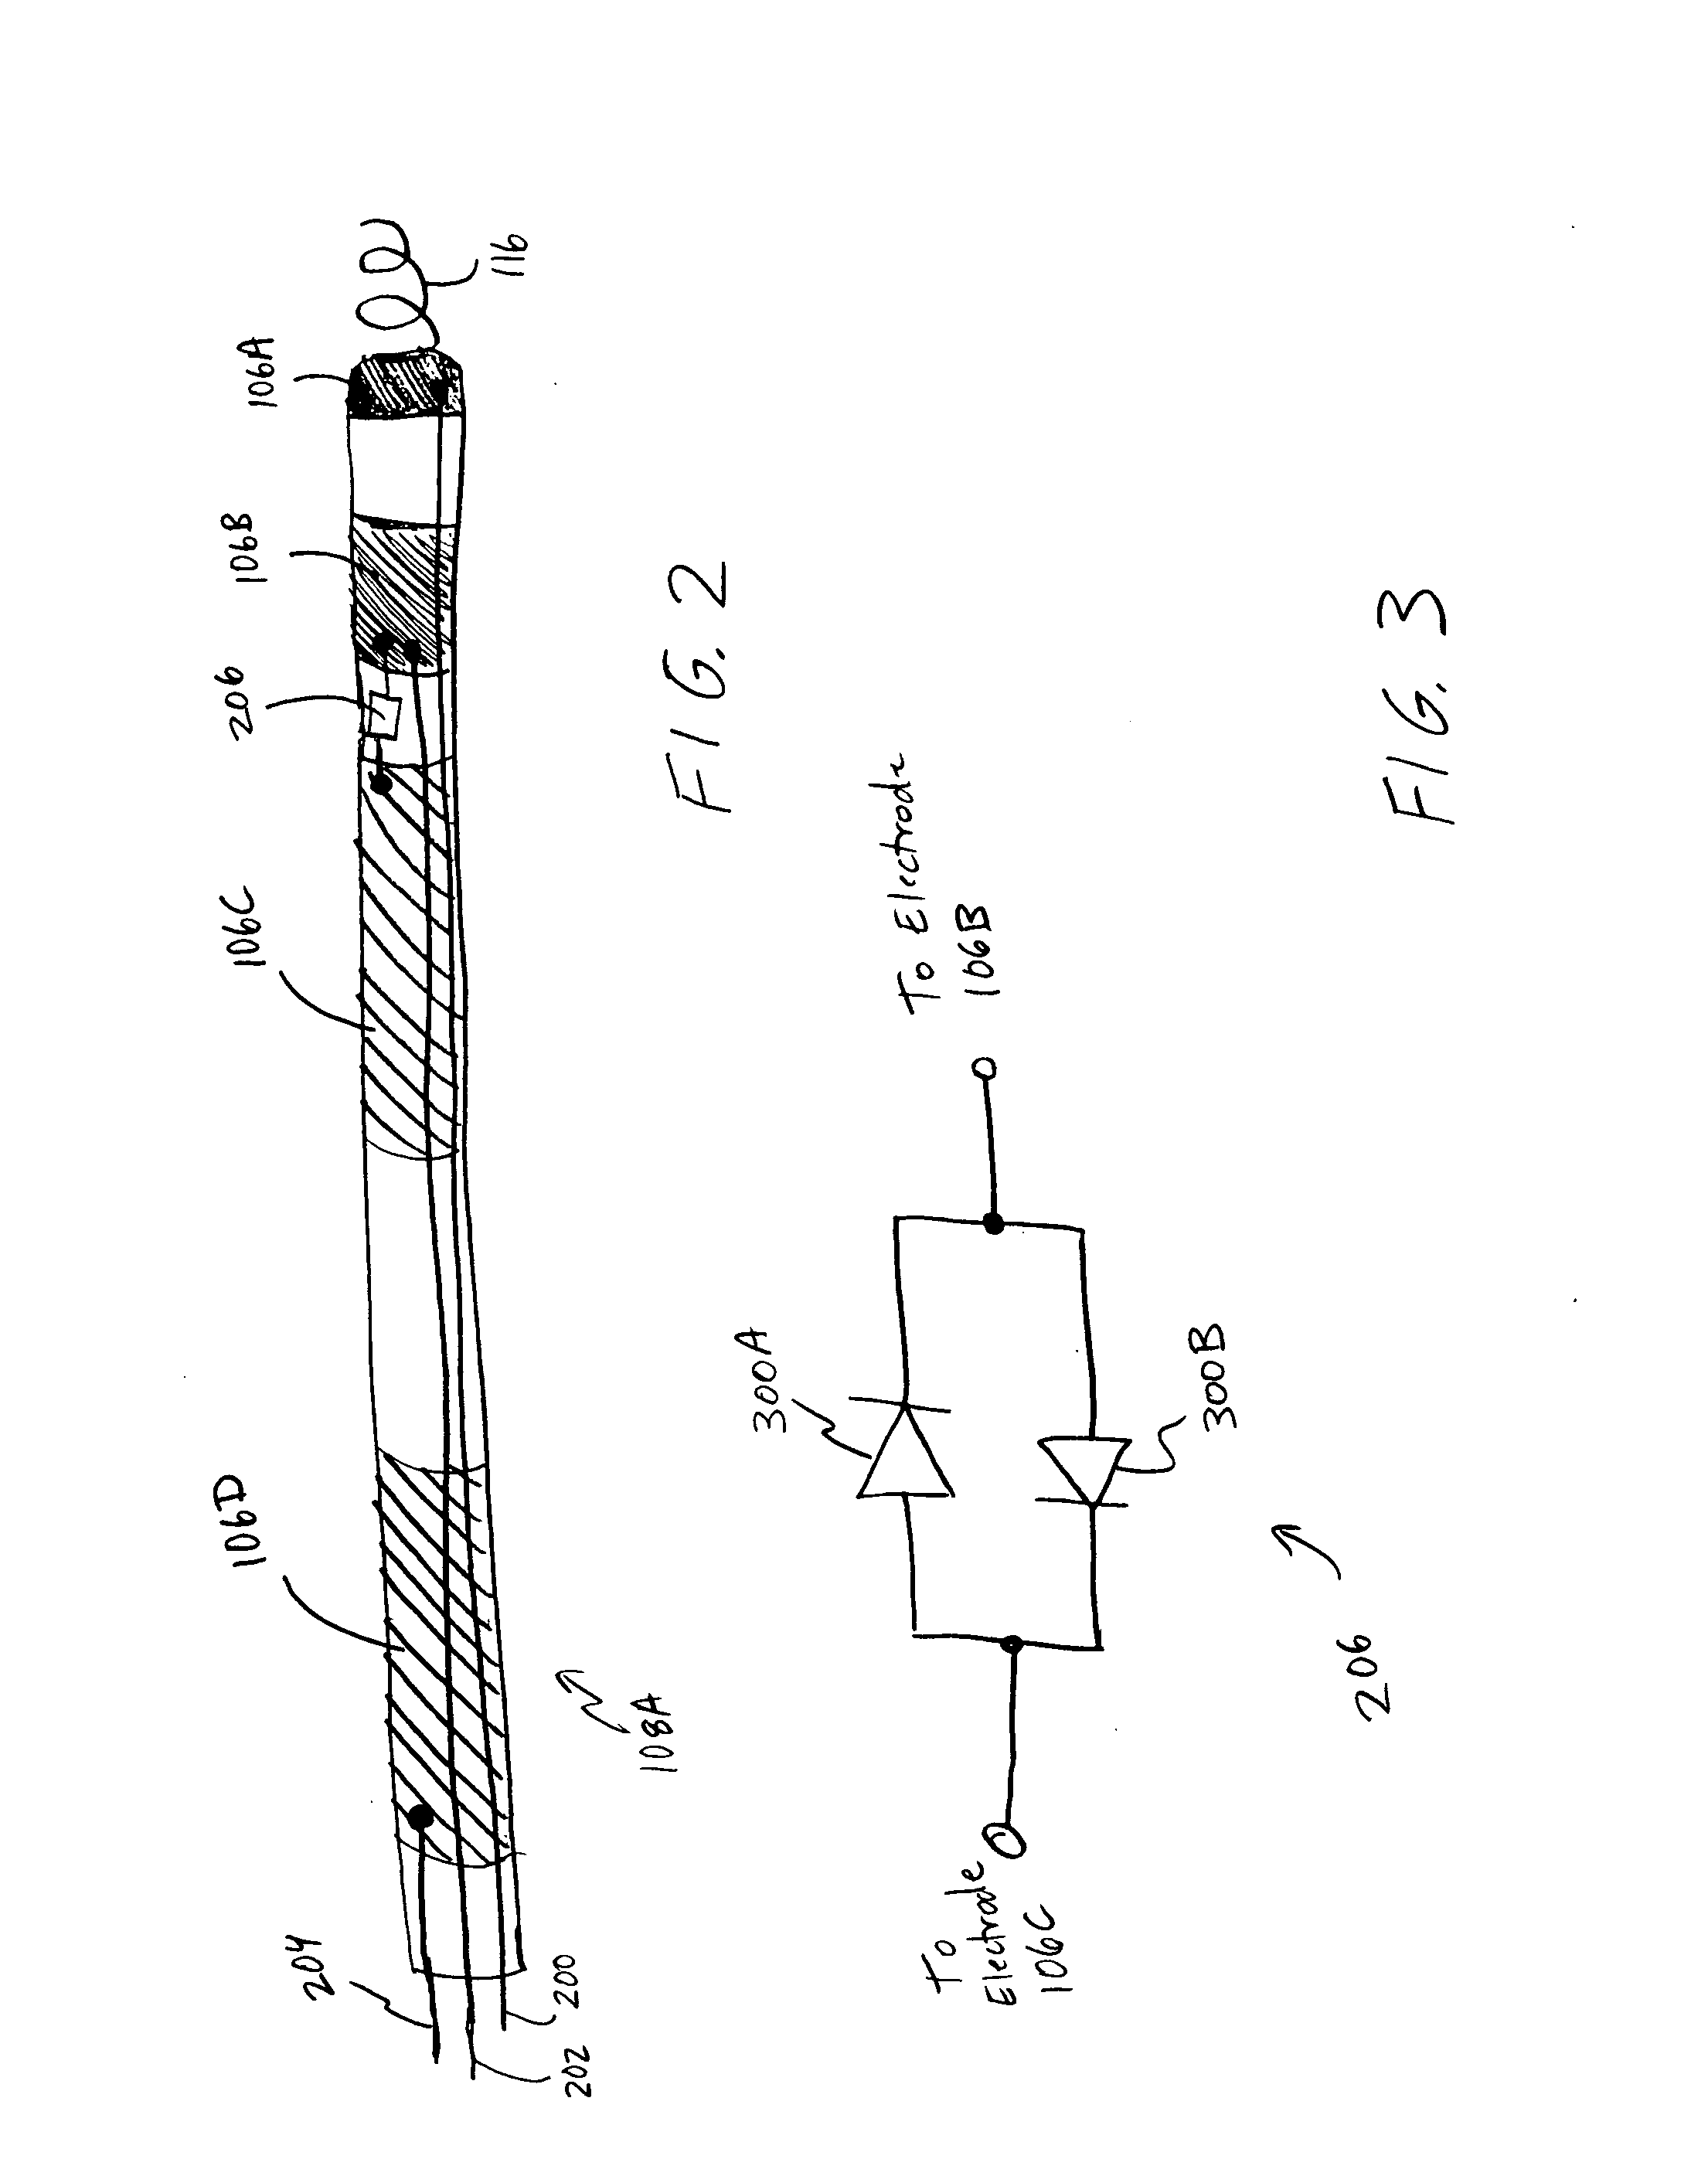 Semiconductor-gated cardiac lead and method of use